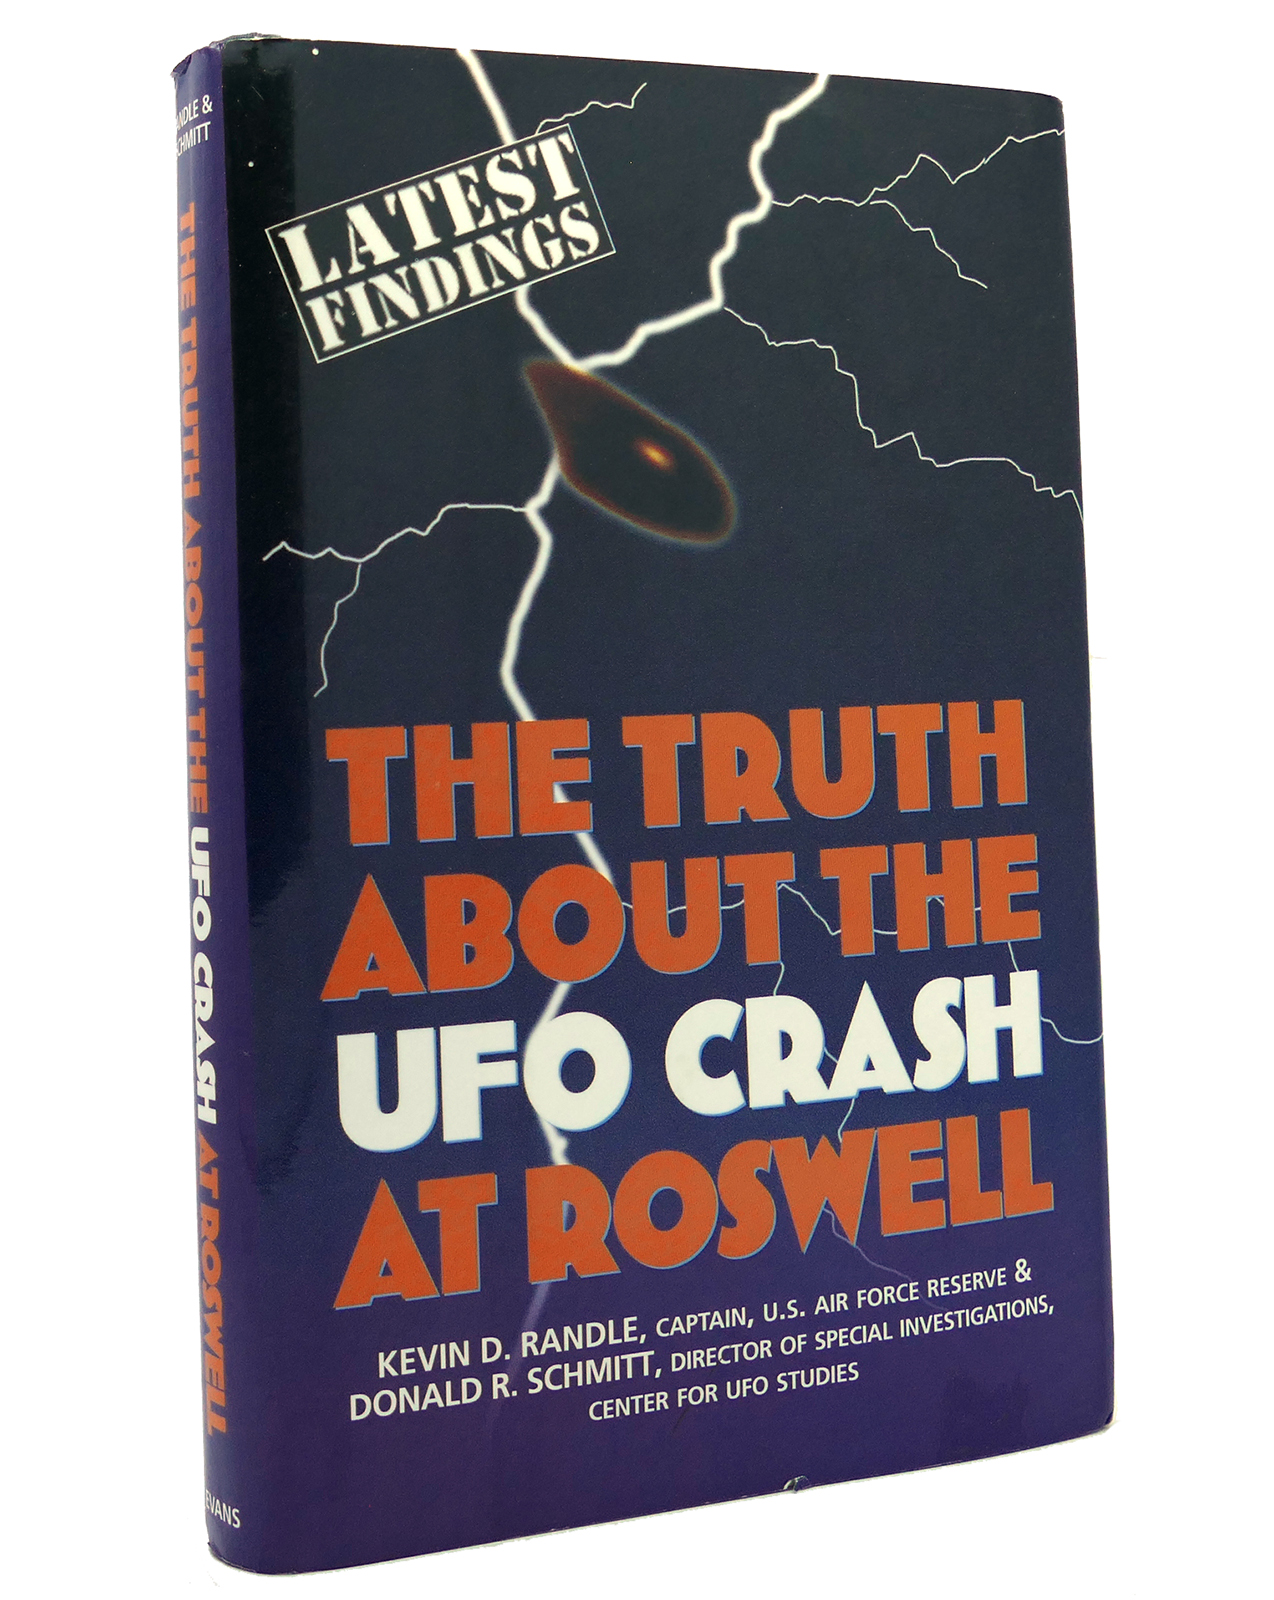 THE TRUTH ABOUT THE UFO CRASH AT ROSWELL - Kevin D. Randle & Donald R. Schmitt